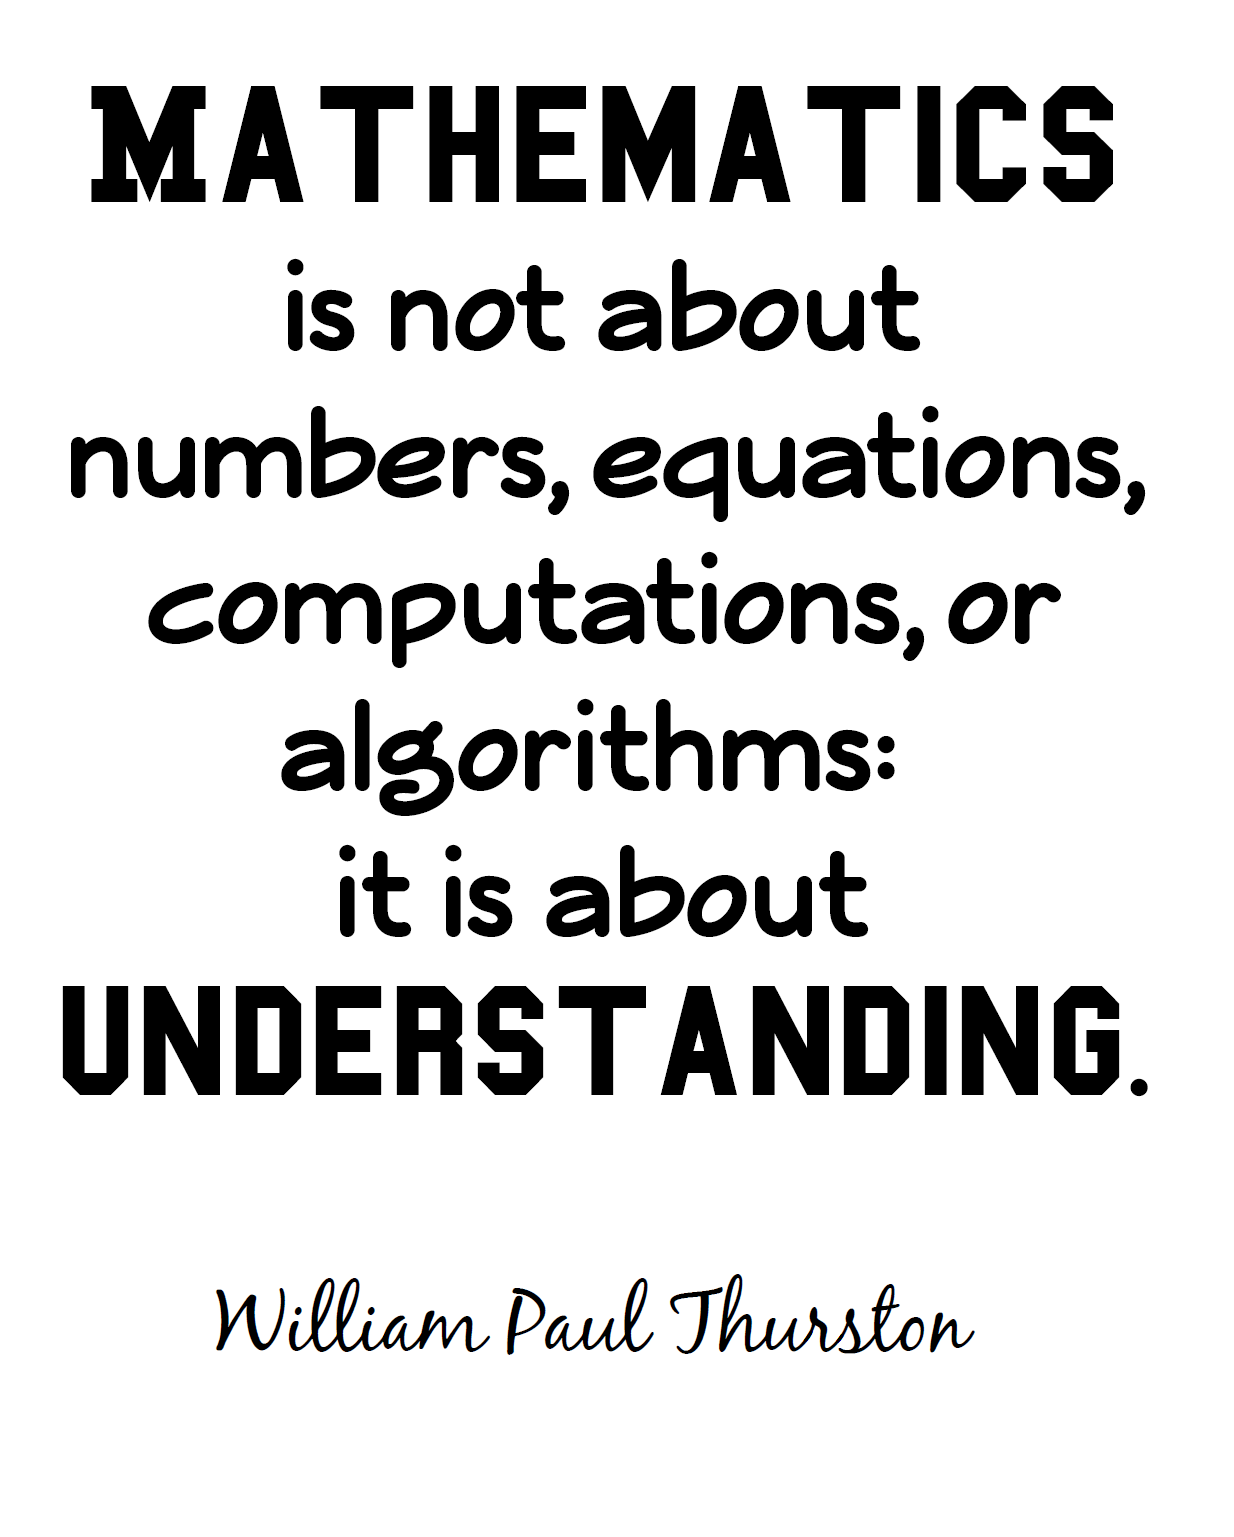 MATHEMATICS is not about numbers equations putations or algorithms it is about UNDERSTANDING